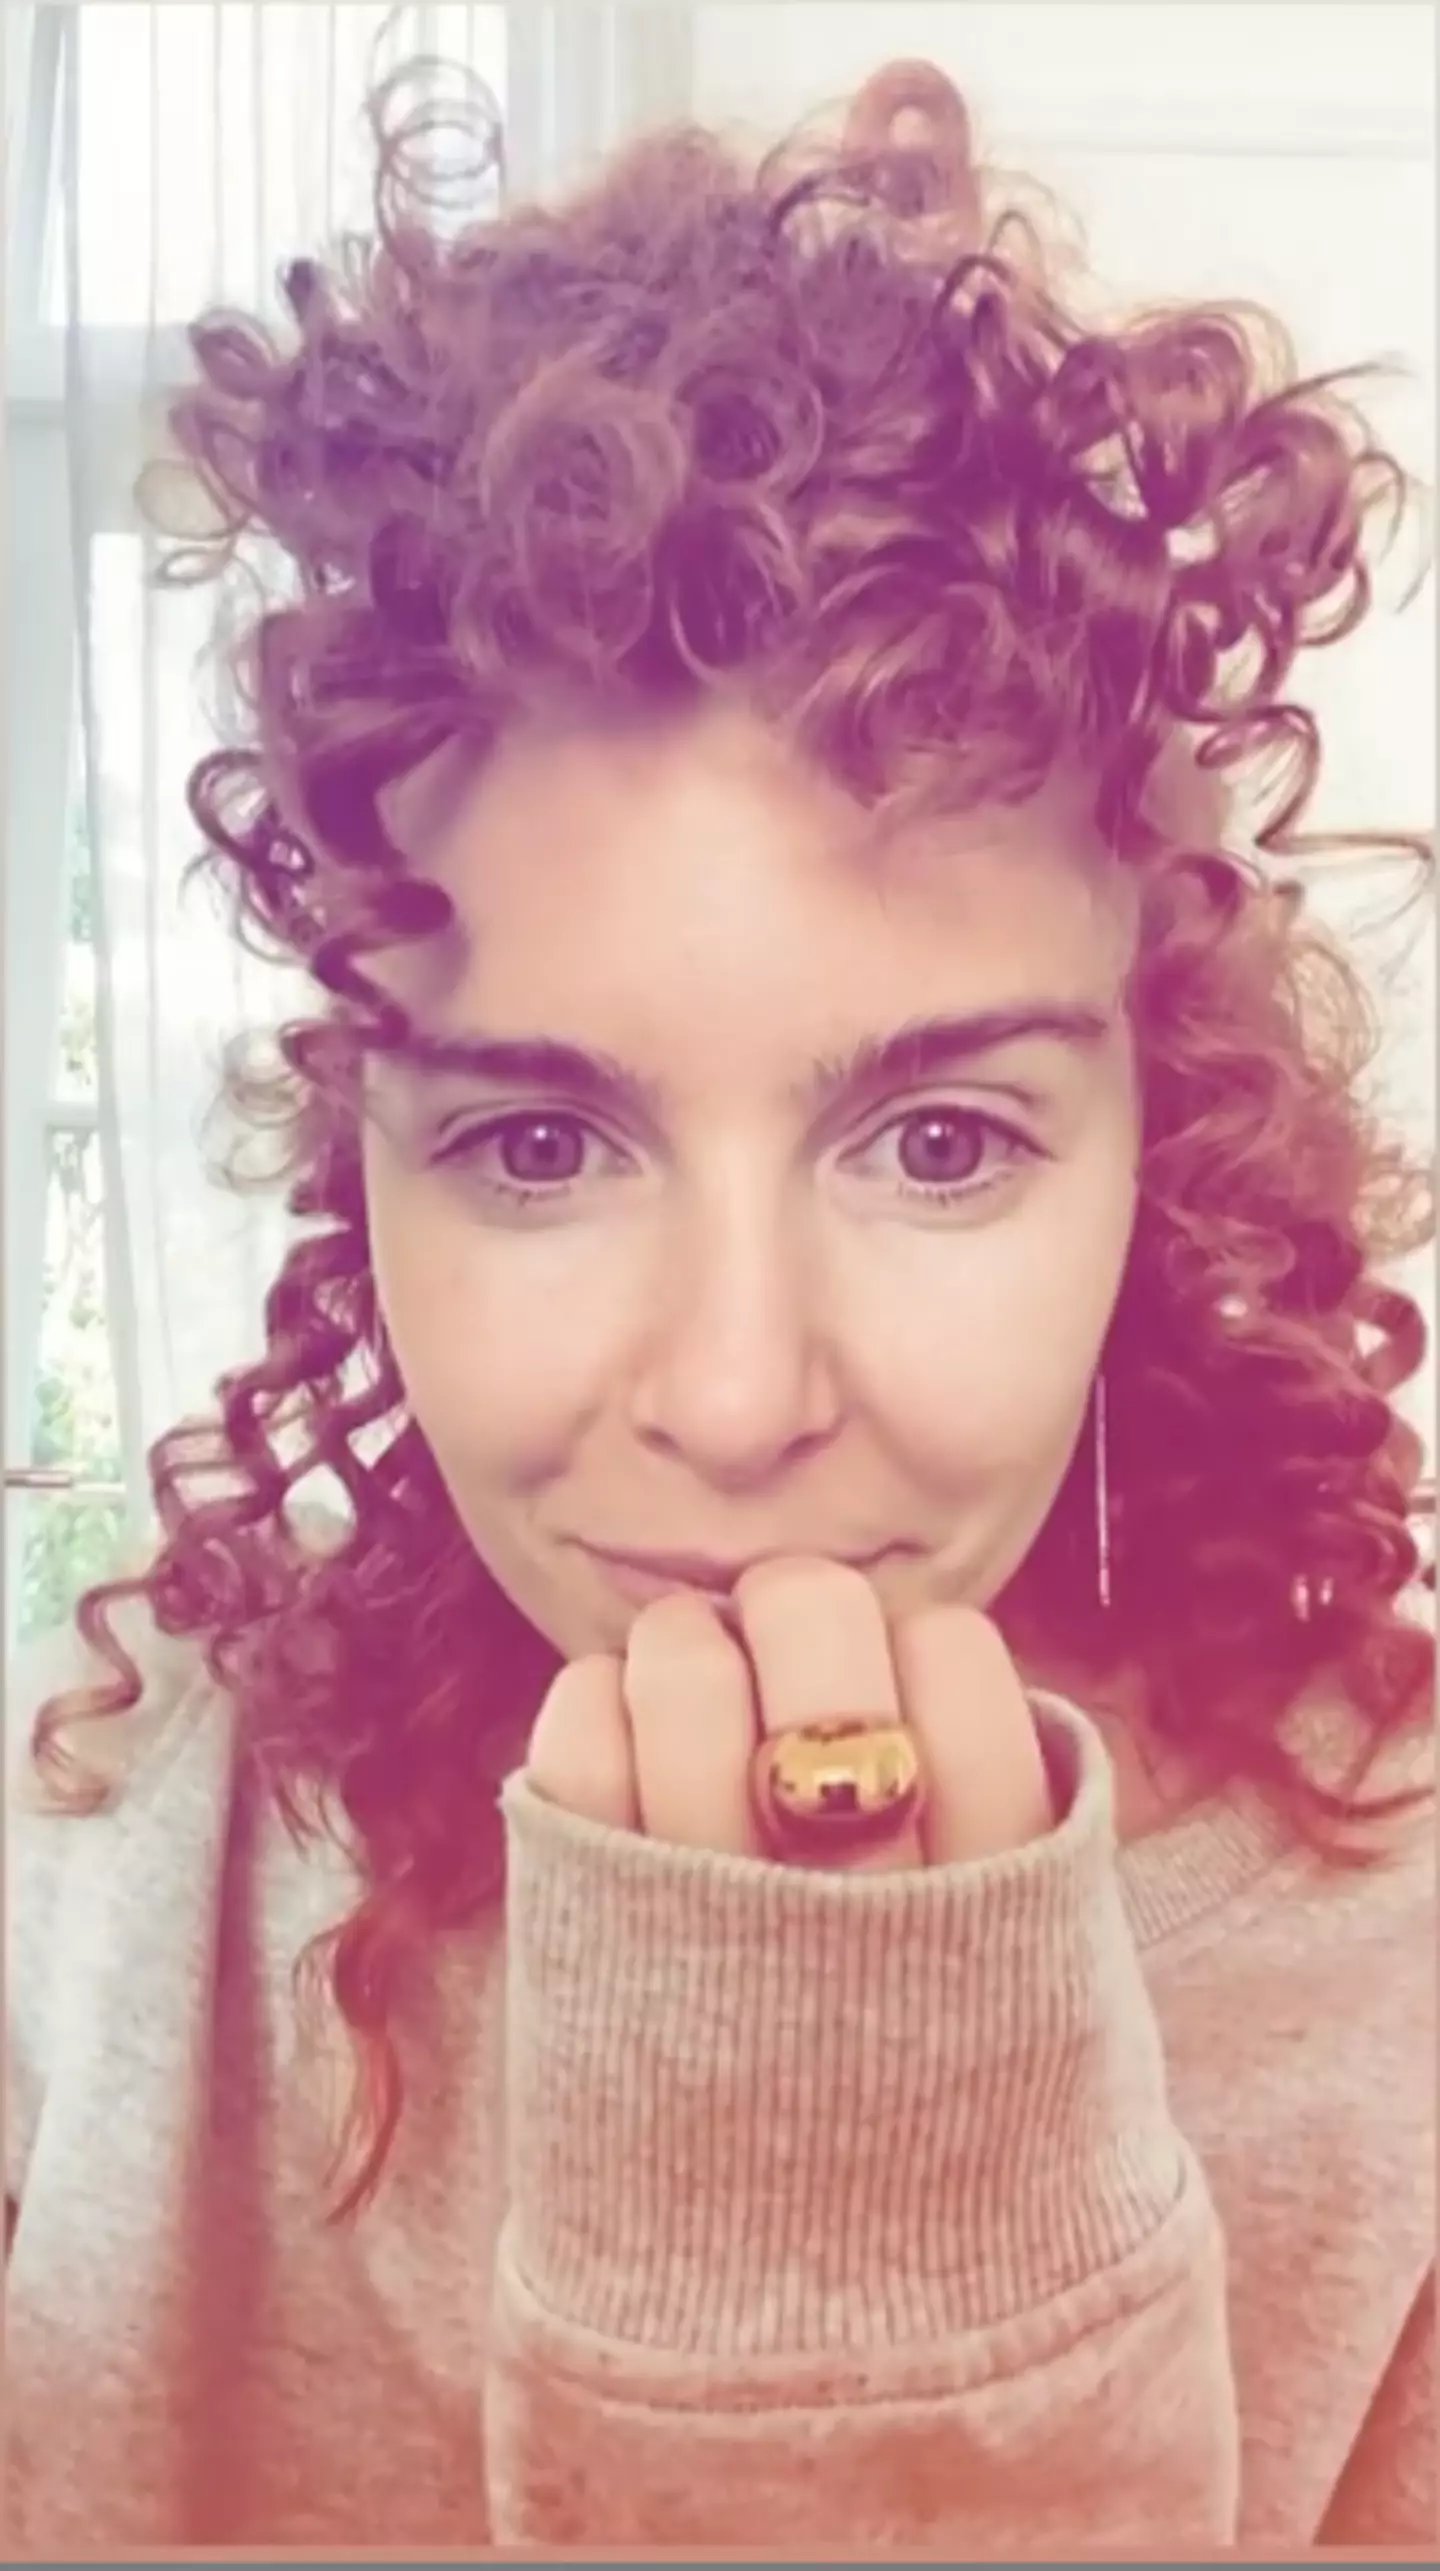 Stacey Dooley looks incredible with curly hair (